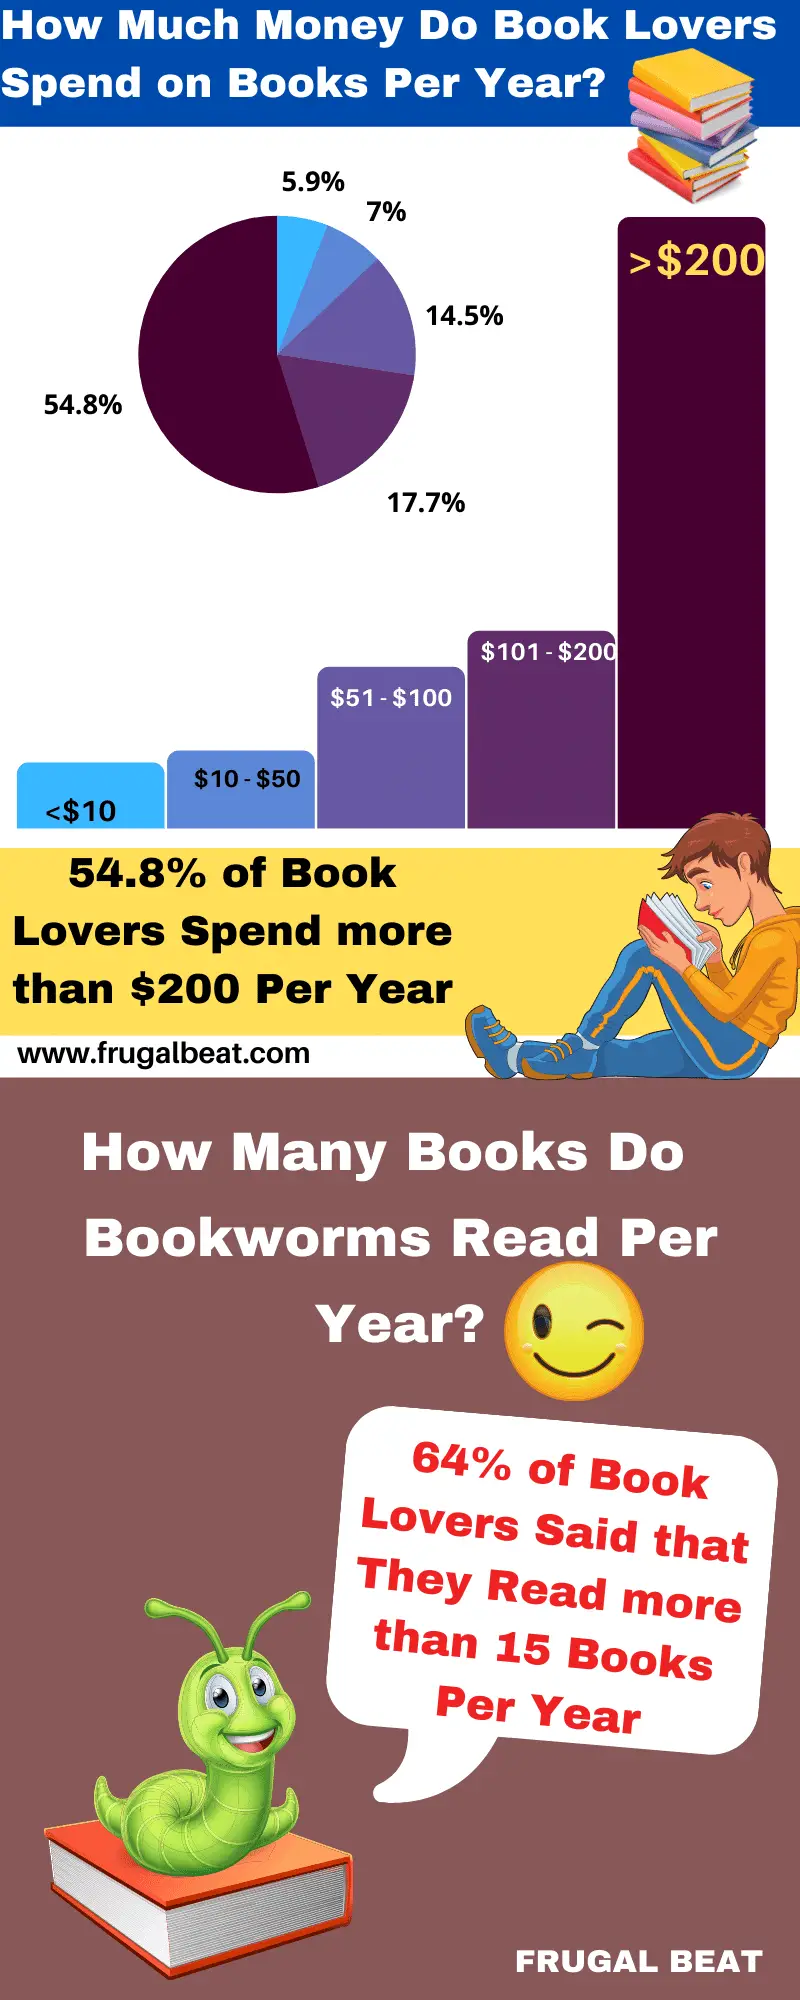 Read More Books for Free